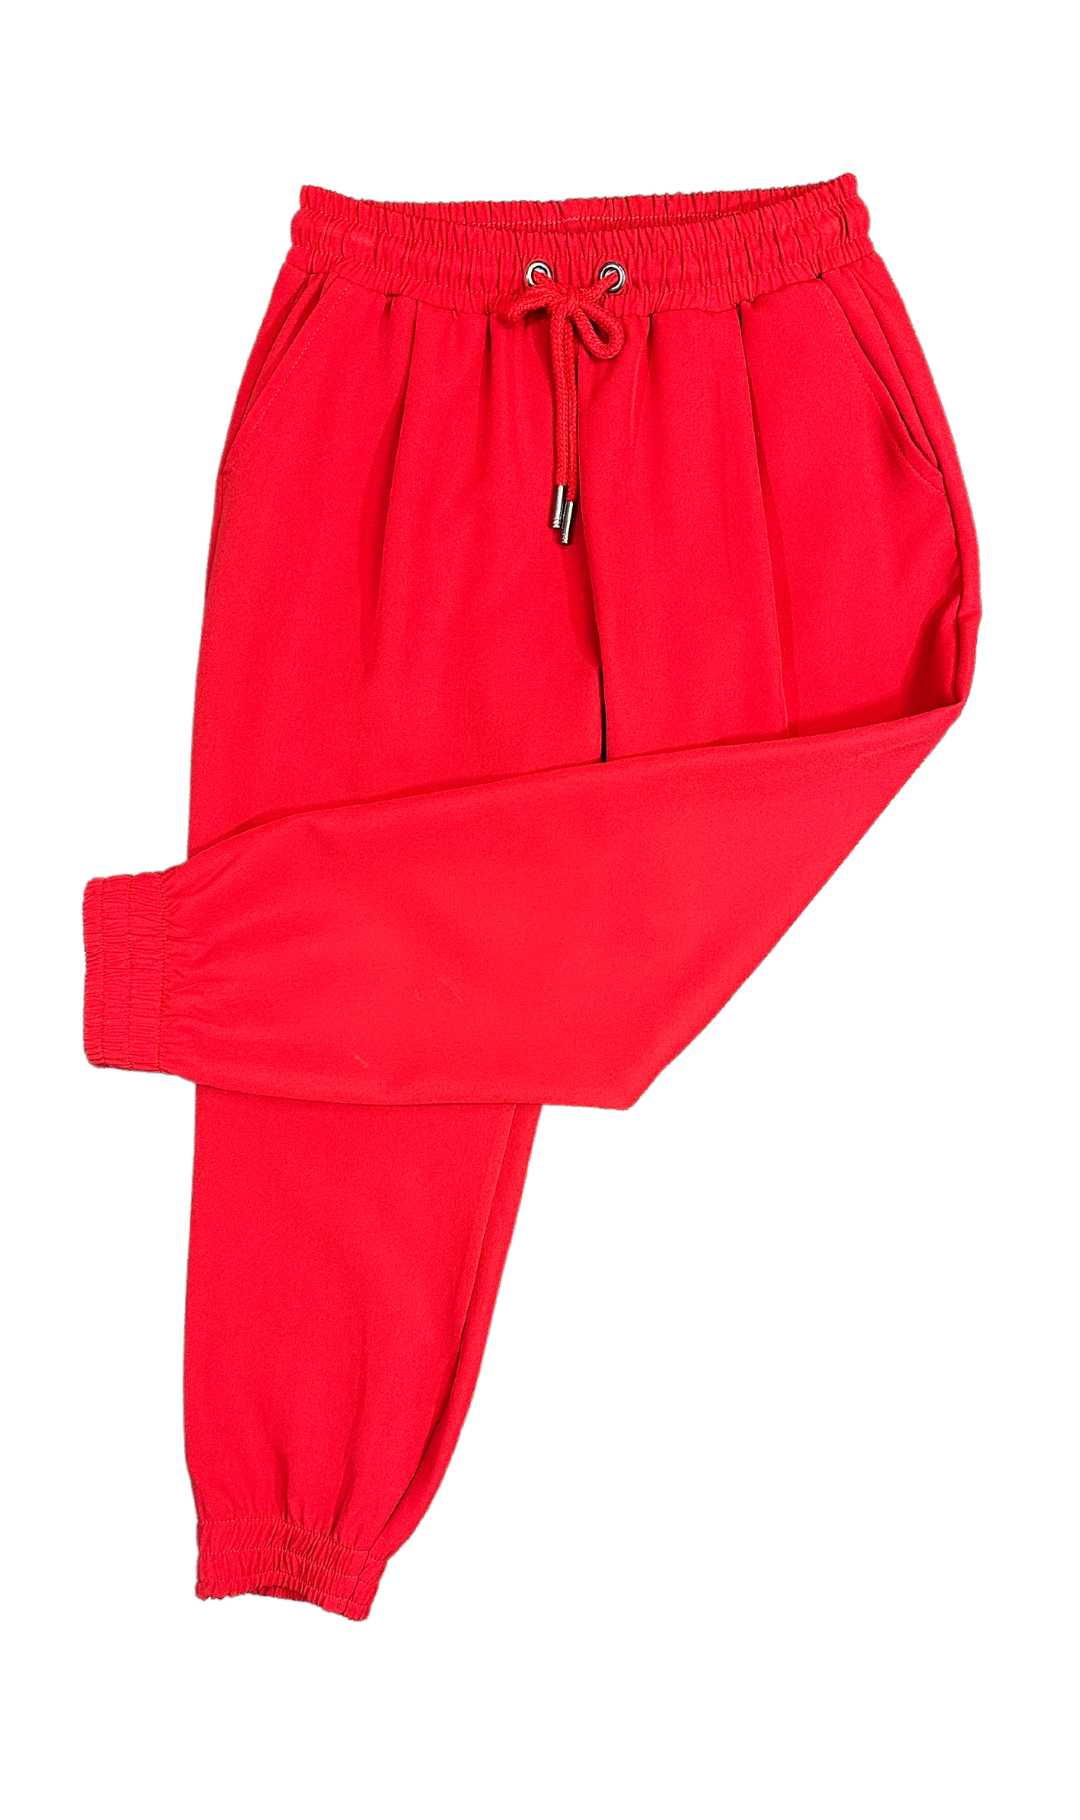 InCity Girls Toddler Tween 1-14 Years Red Comfy Holiday Cowper Jogger Pants InCity Boys Girls